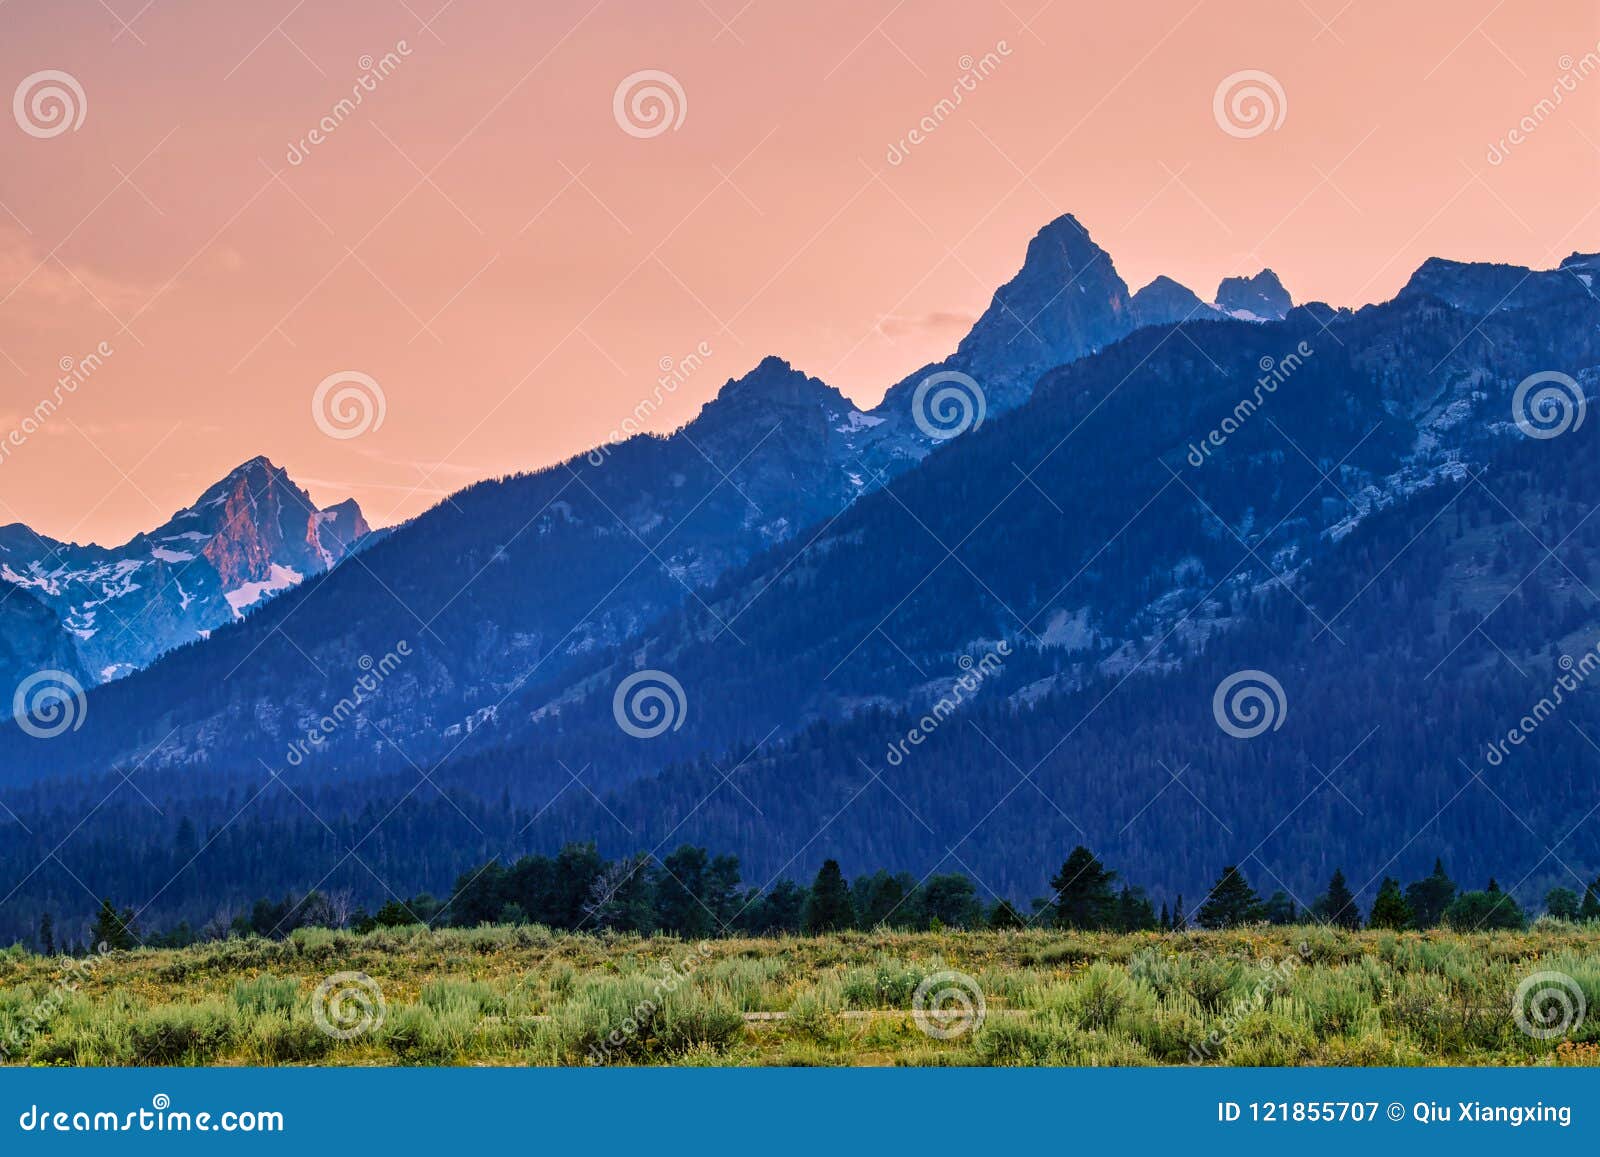 the mountains and luxuriant plants in the setting sun